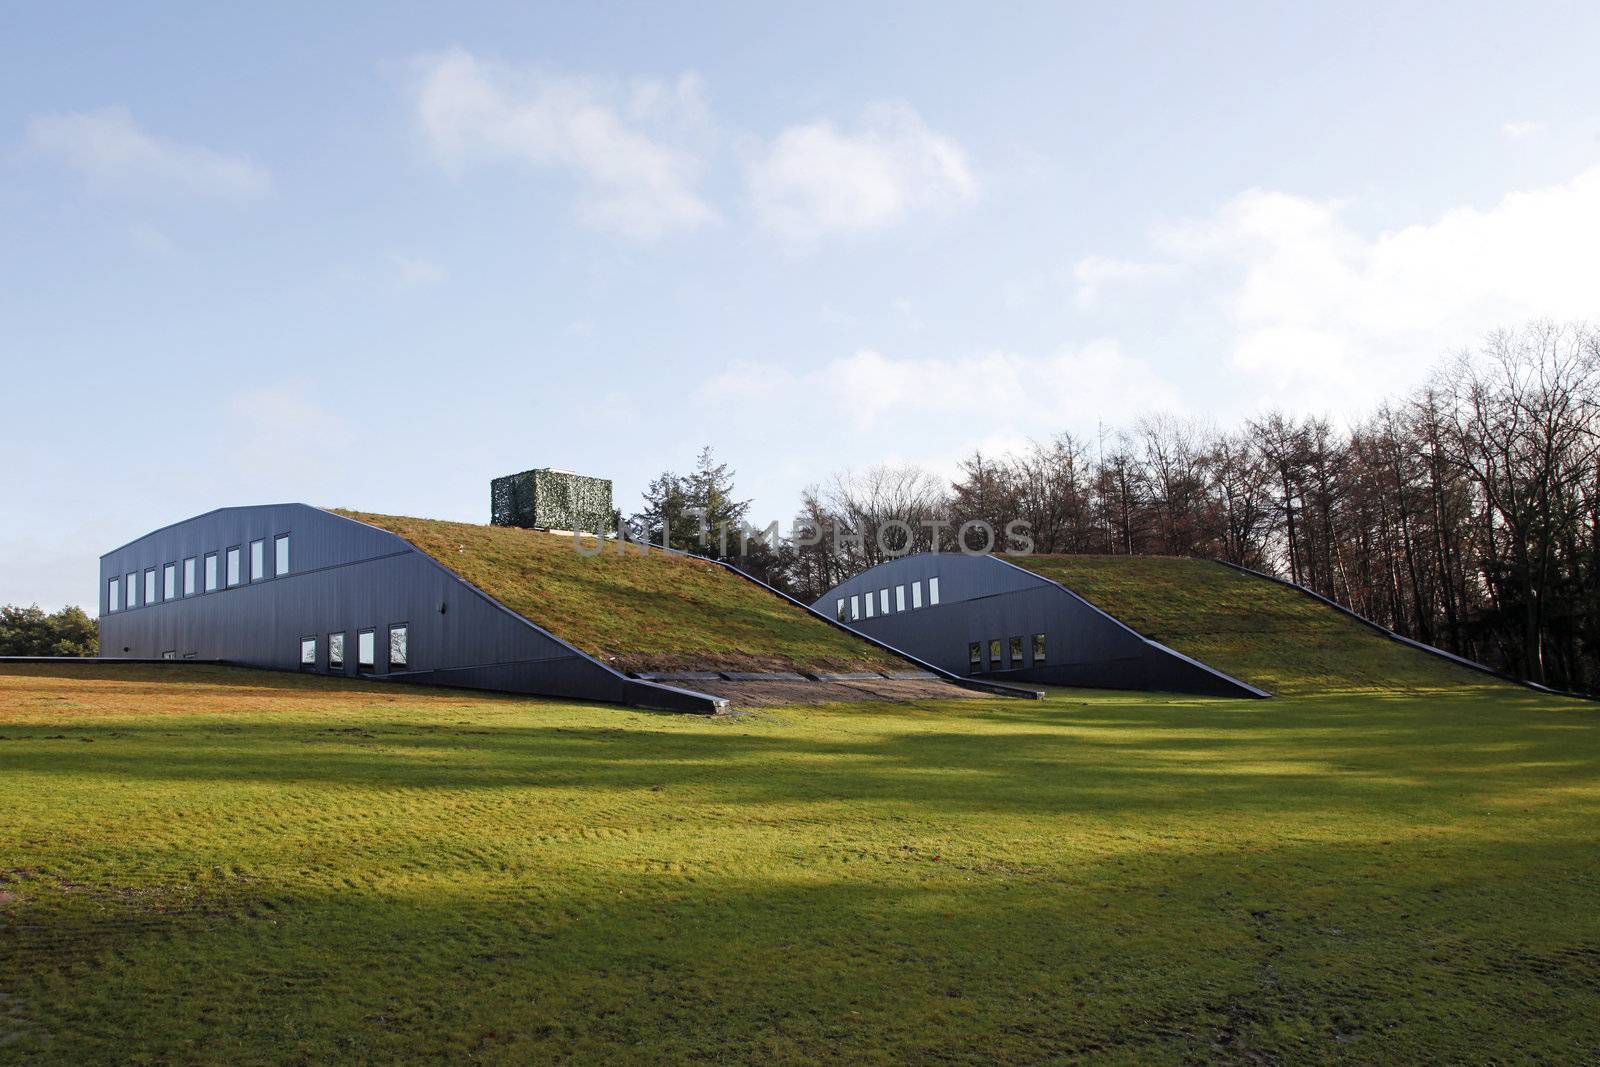 Two green roofs in The Netherlands